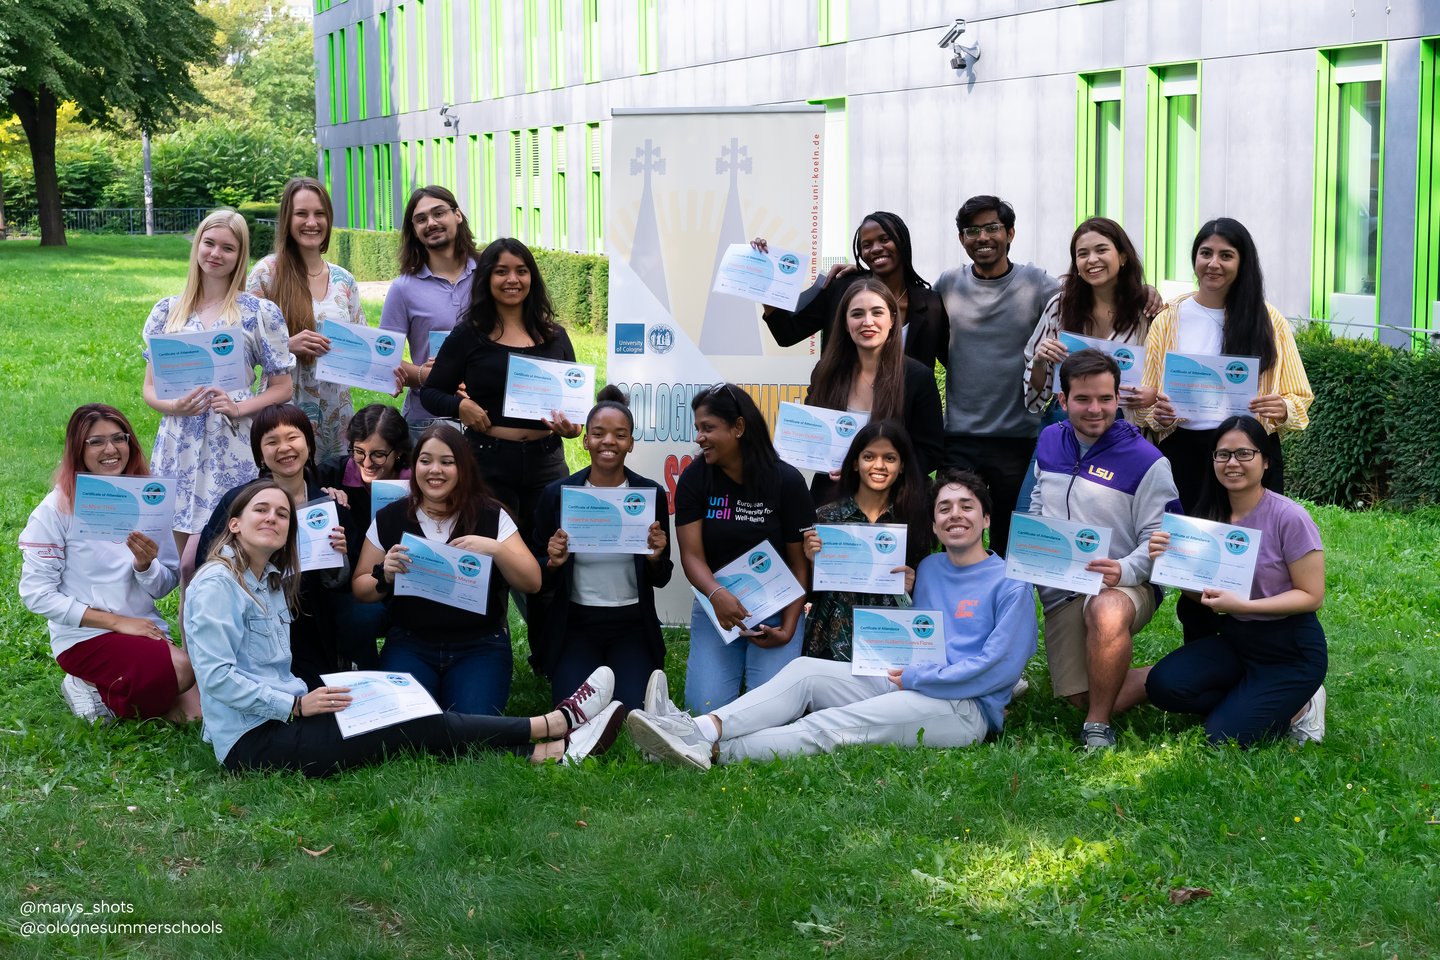 group picture with all onsite participants holding their certificates